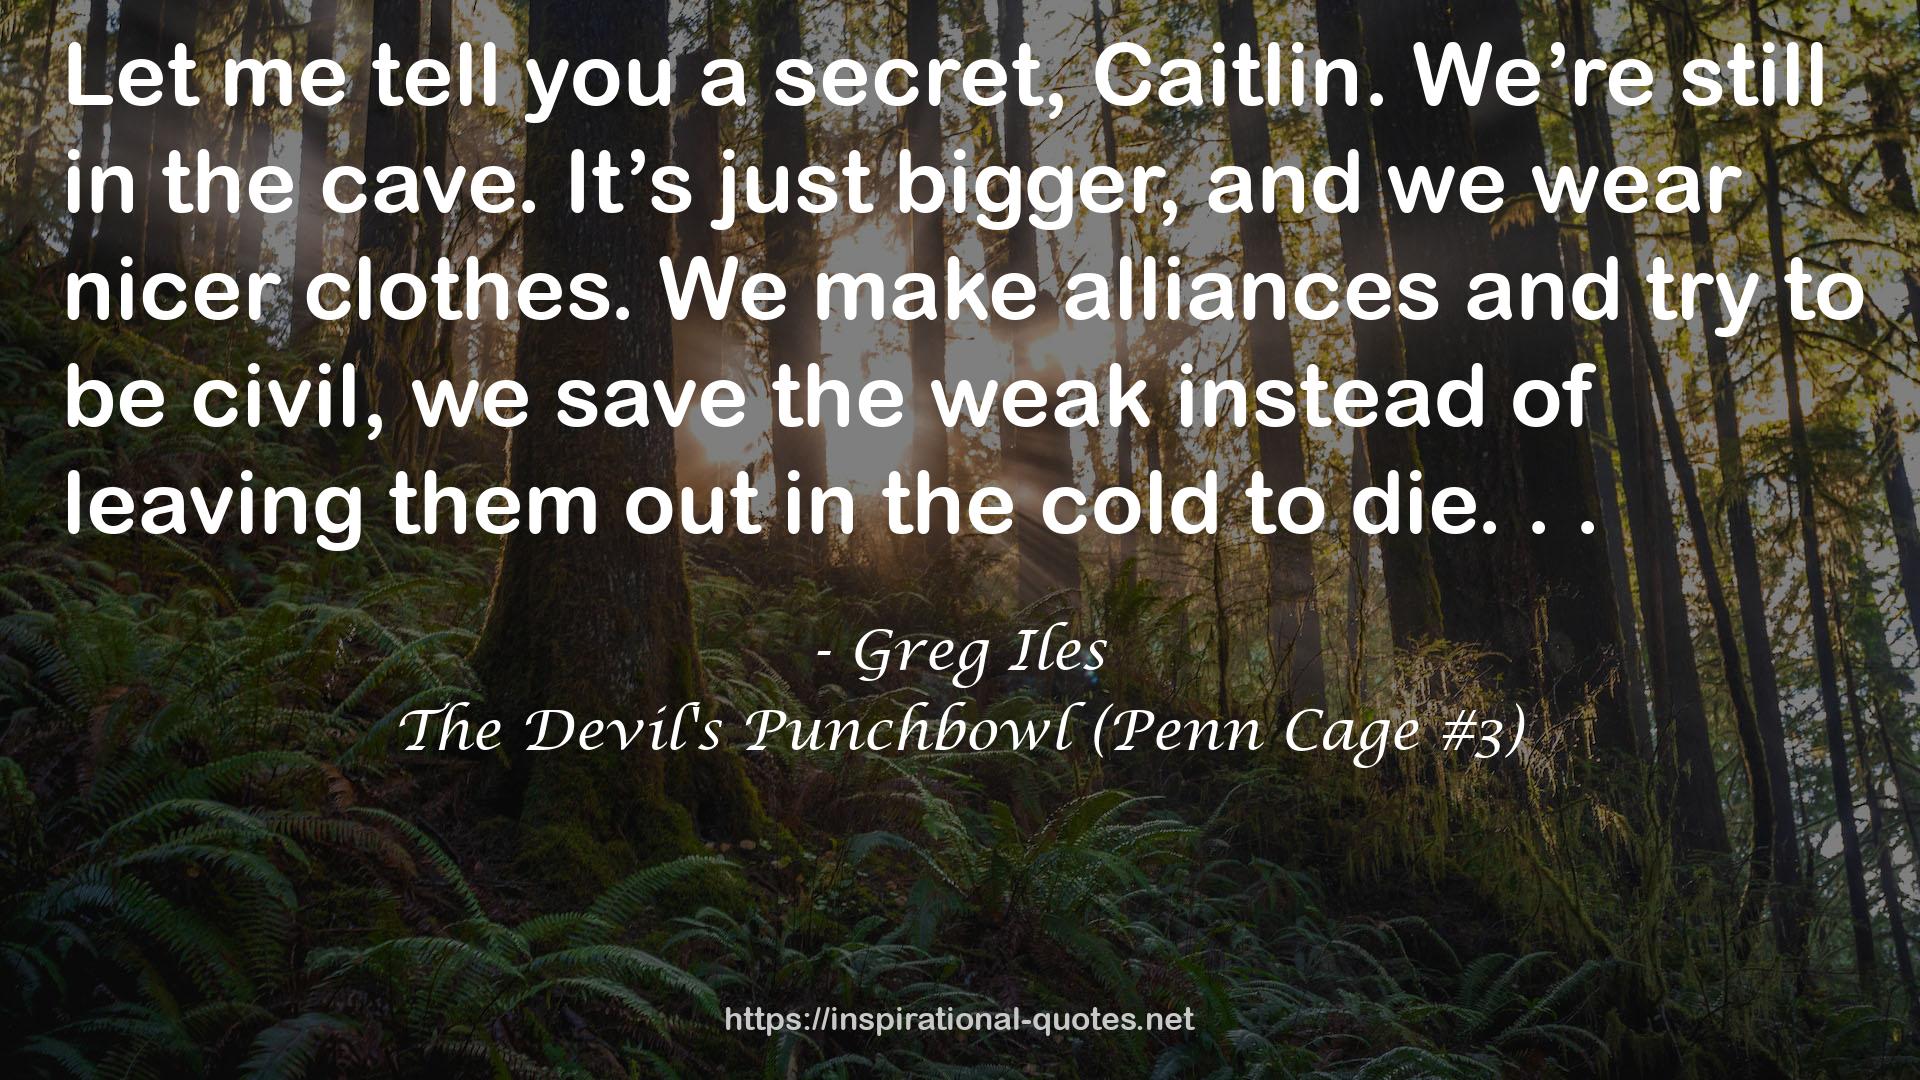 The Devil's Punchbowl (Penn Cage #3) QUOTES